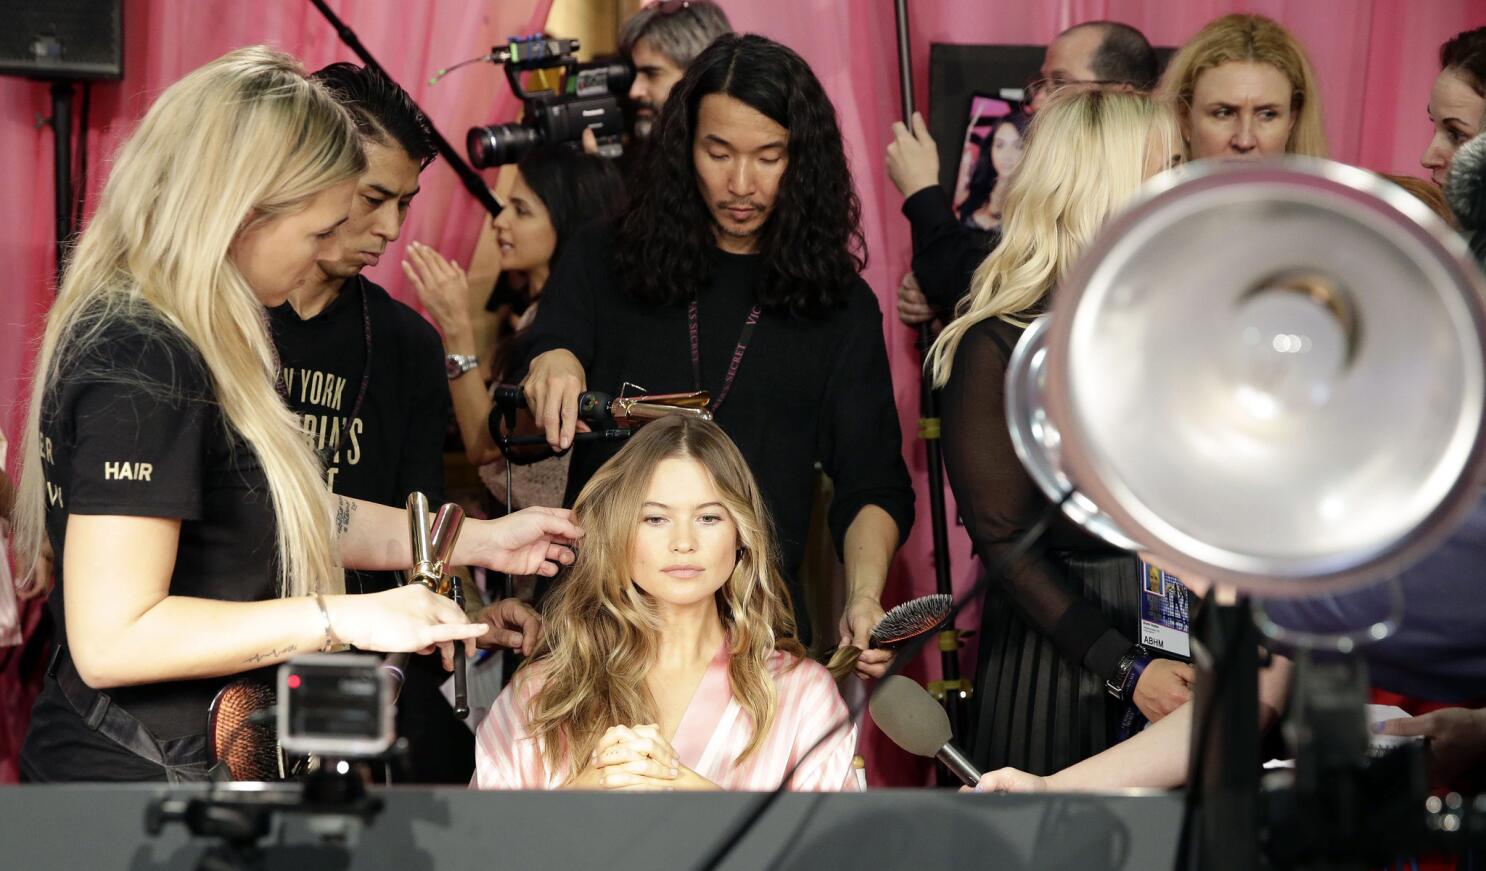 Victoria's Secret Staffers Complained the Brand Became Too Sexualized